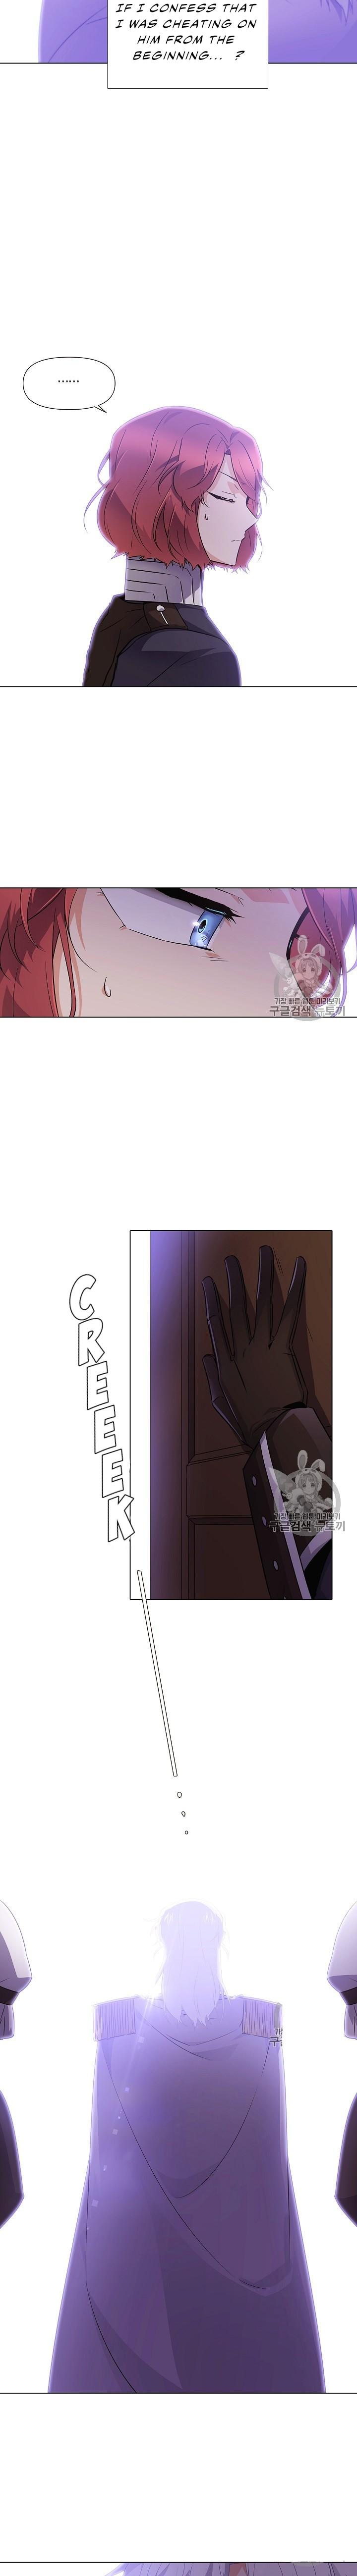 The Villain Discovered My Identity - Chapter 33 Page 15